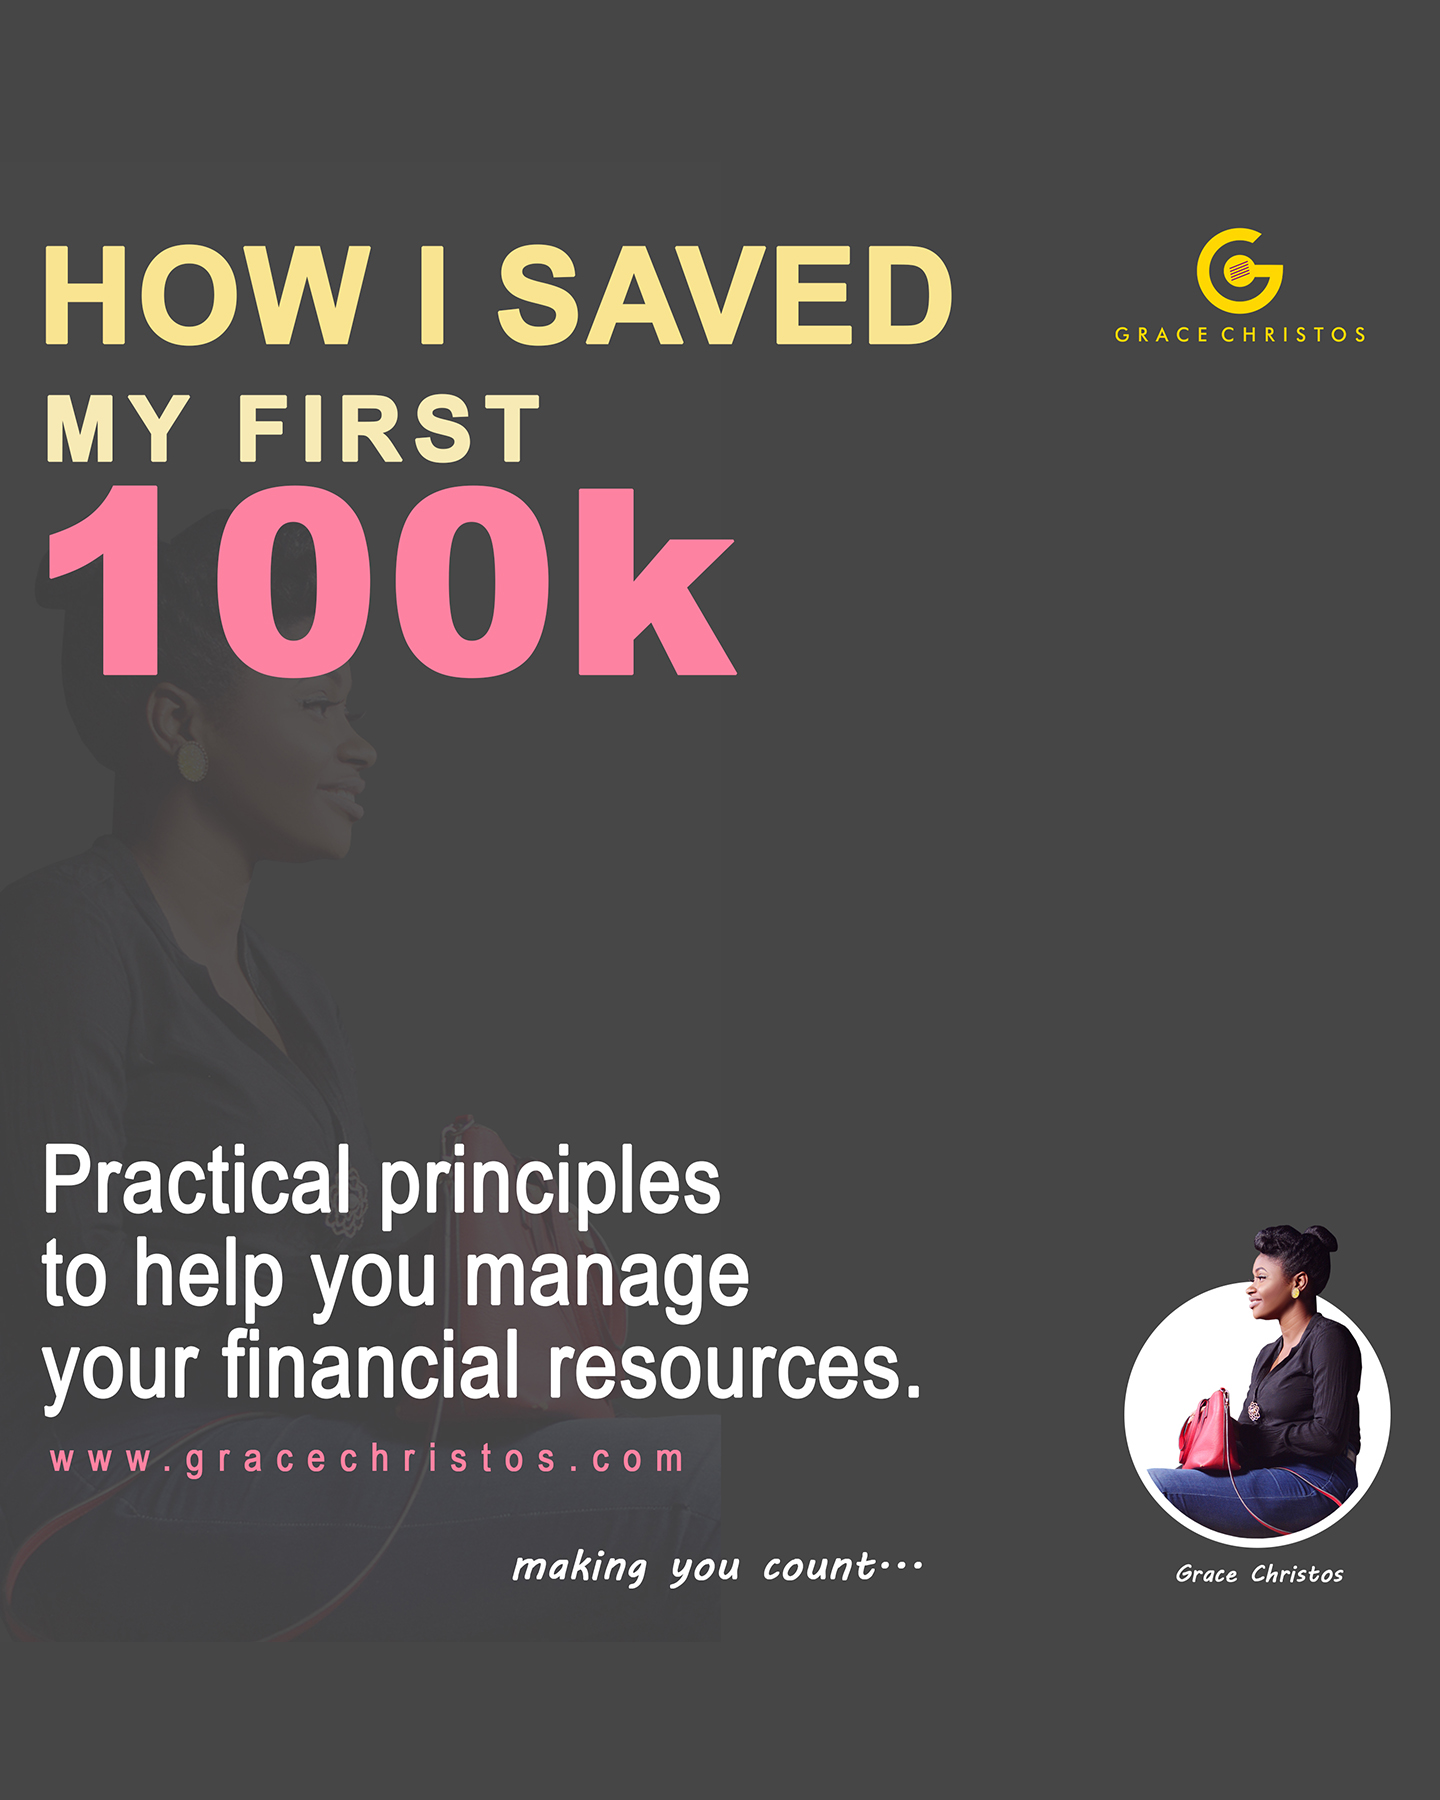 HOW I SAVED MY FIRST 23K - Grace Christos